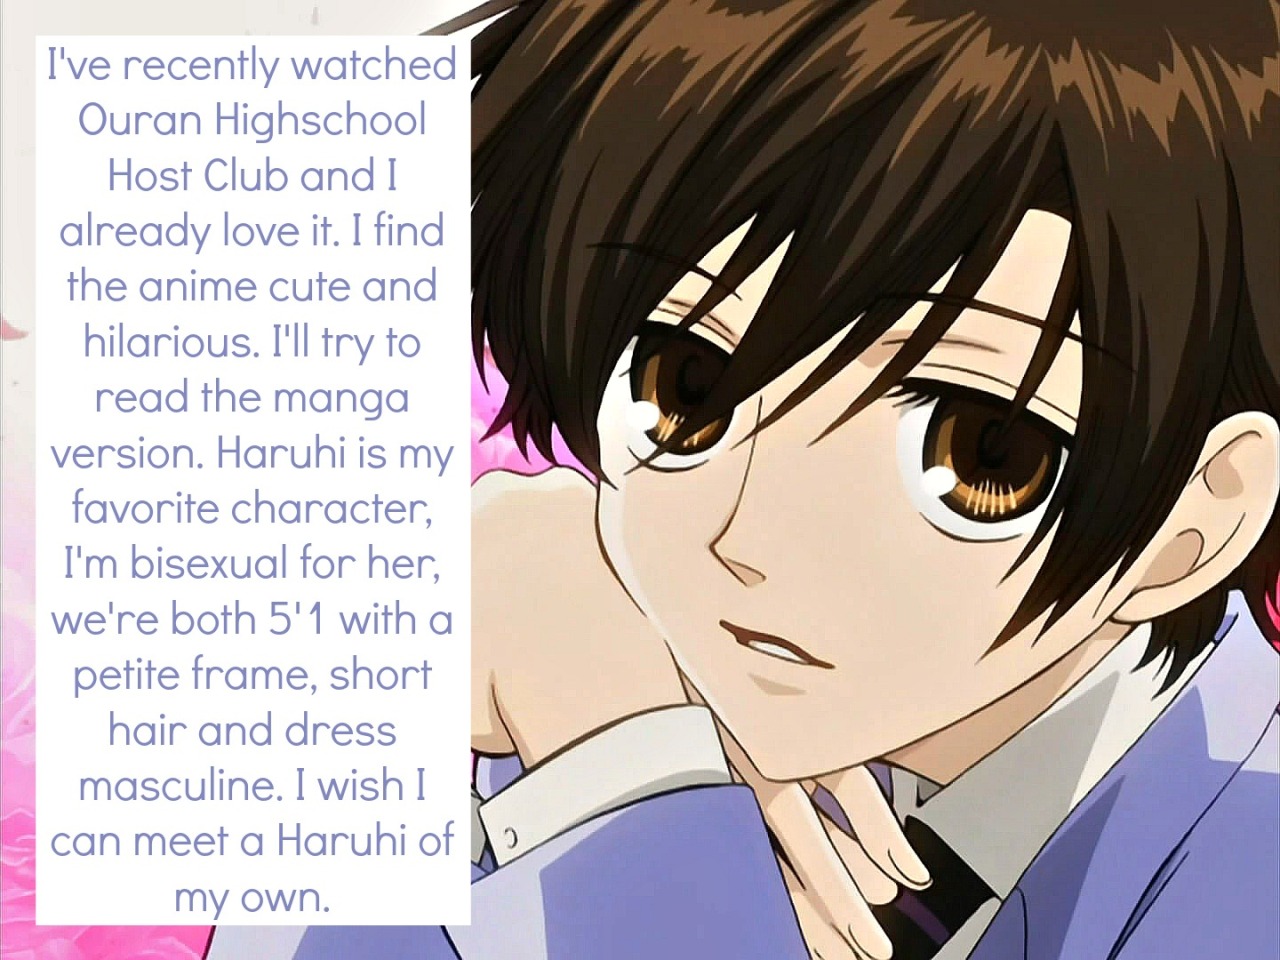 Confessions of an Animangaholic — “I've recently watched Ouran Highschool  Host Club...